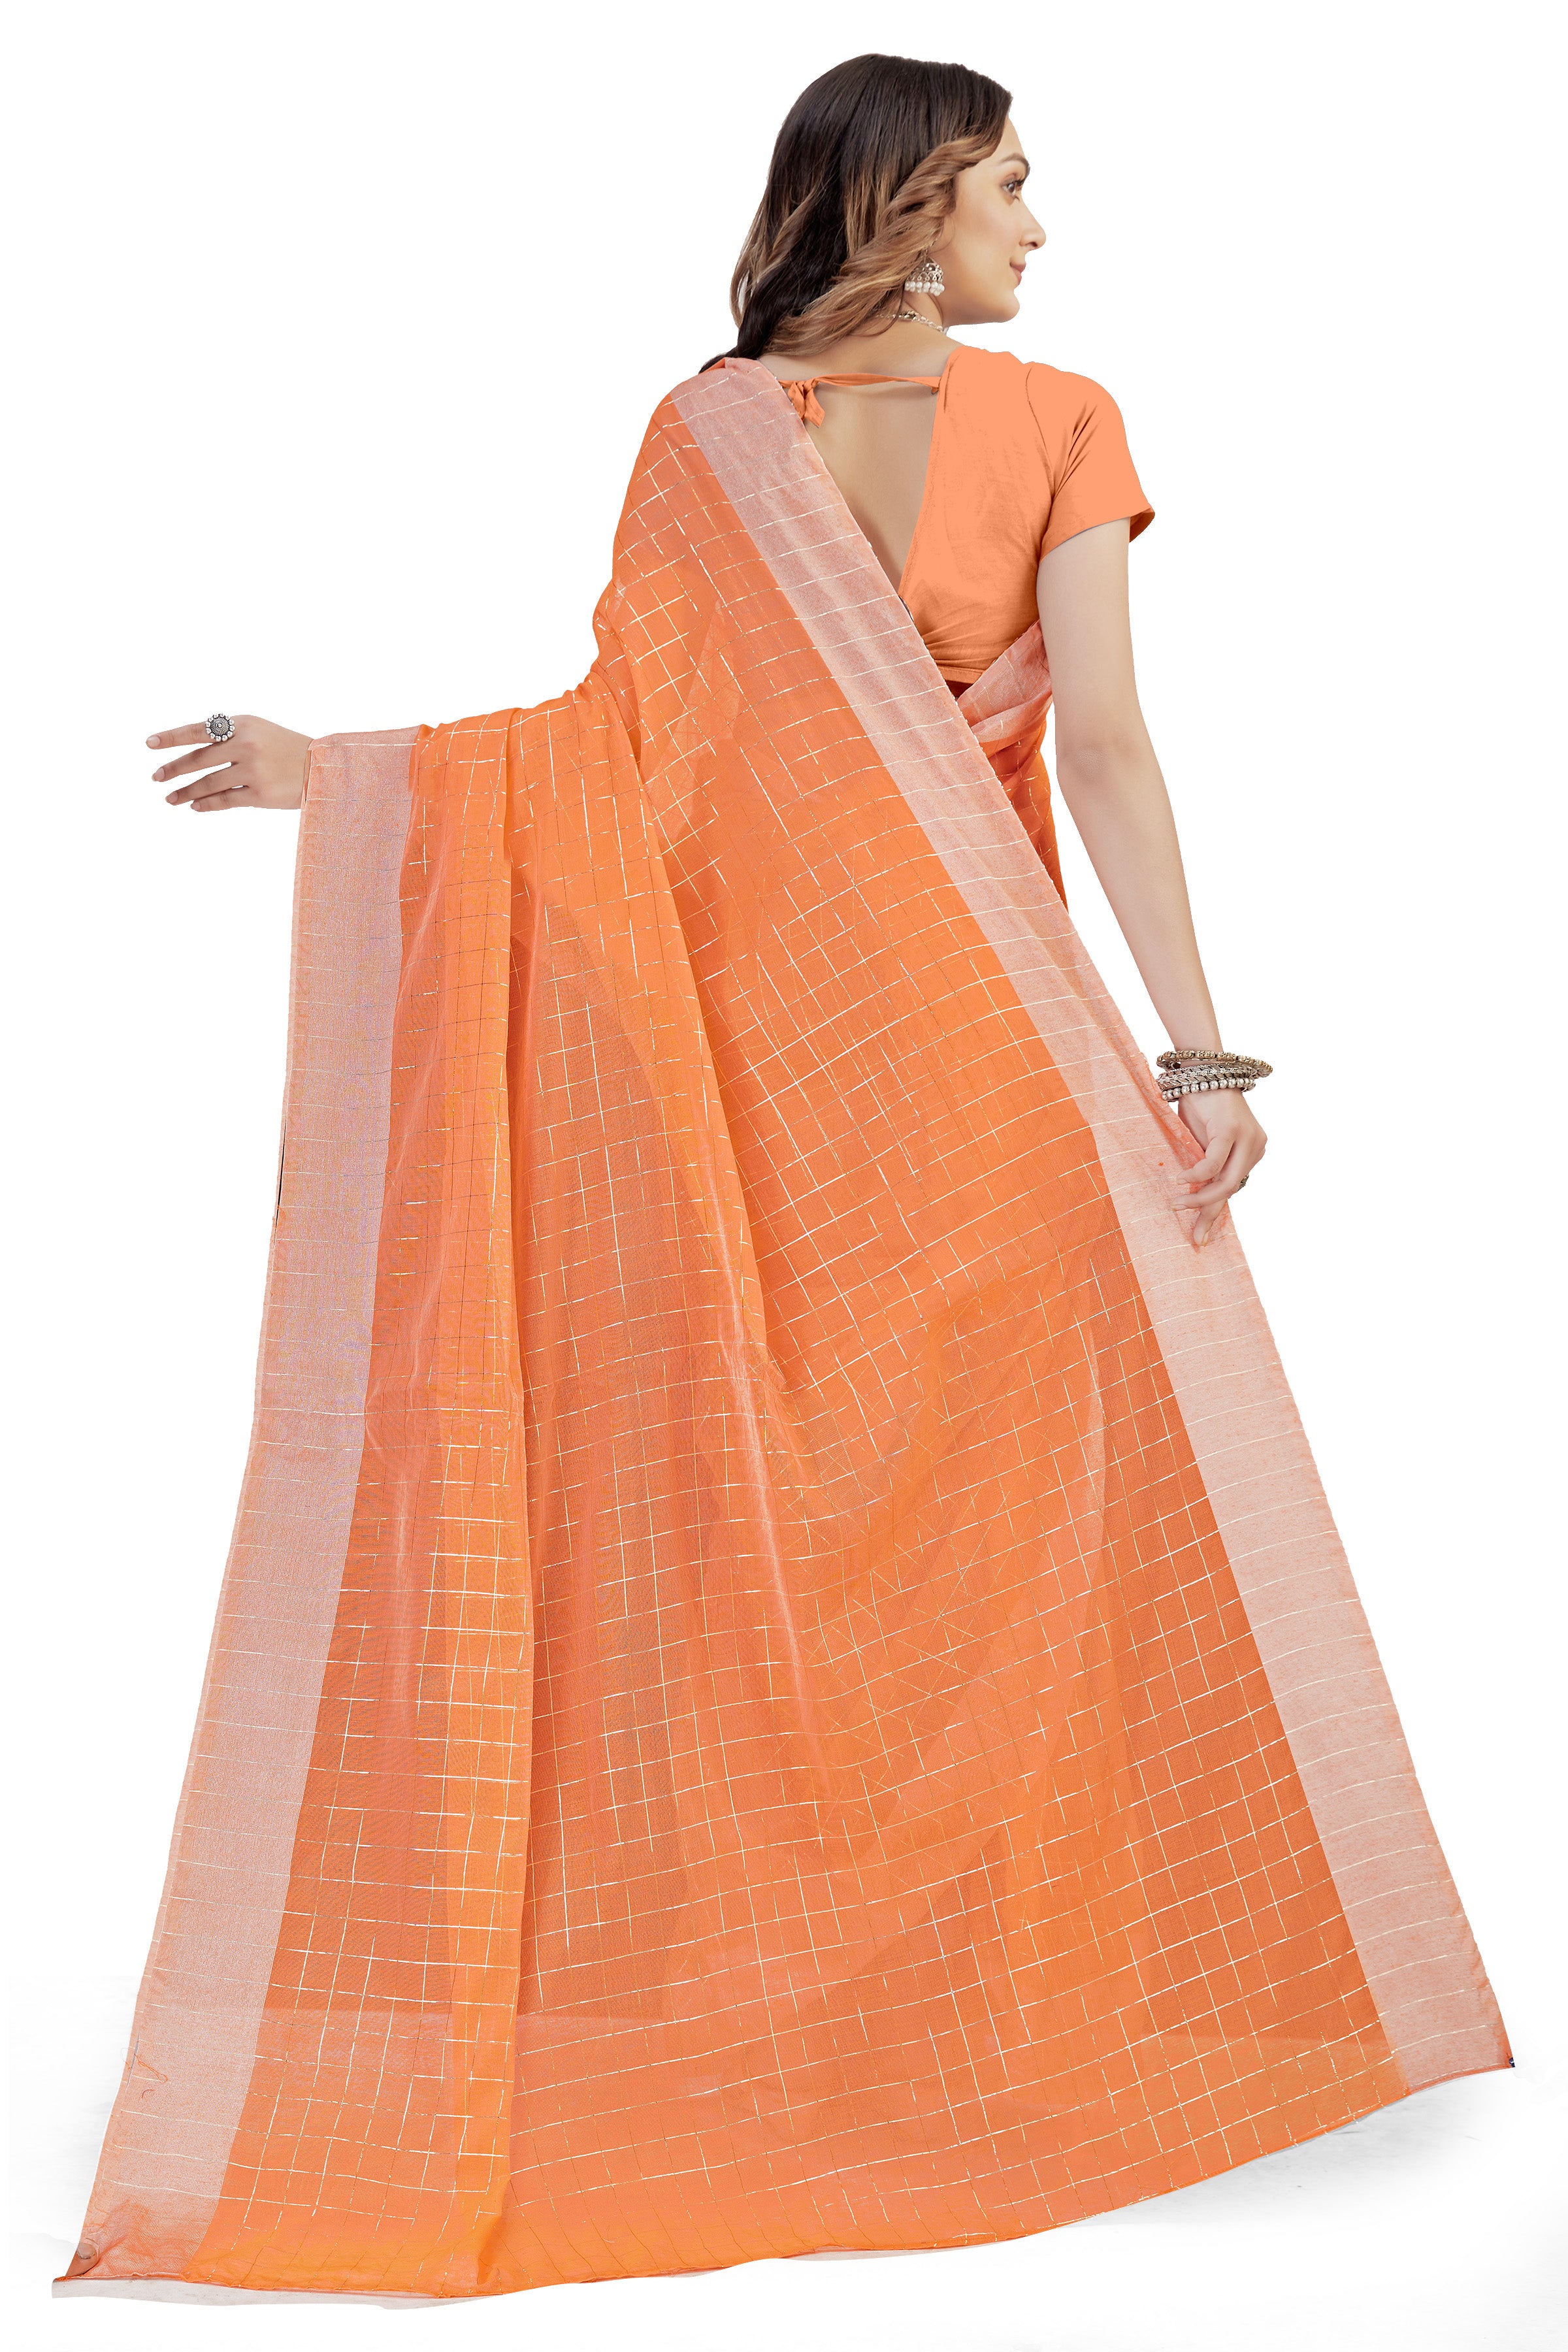 Women's self Woven Checked Daily Wear Cotton Blend Sari With Blouse Piece (Orange) - NIMIDHYA